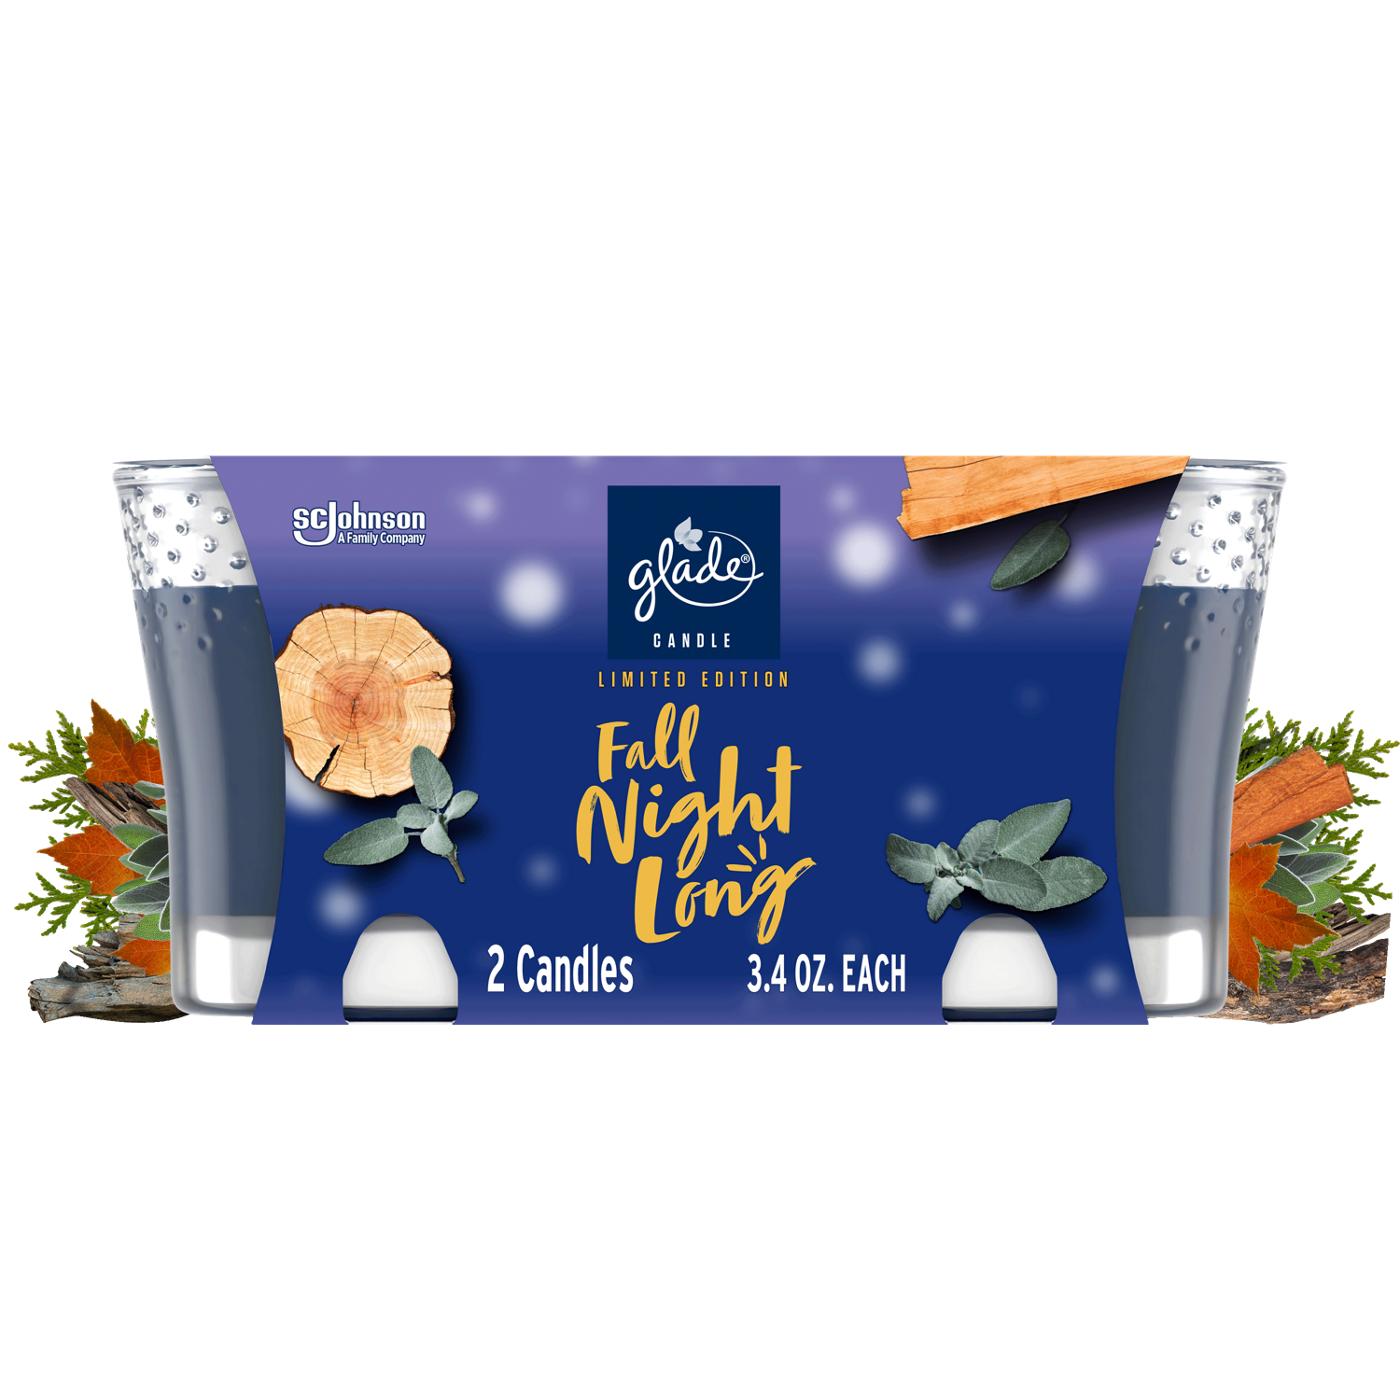 Glade Fall Night Long Candles Value Pack; image 1 of 2